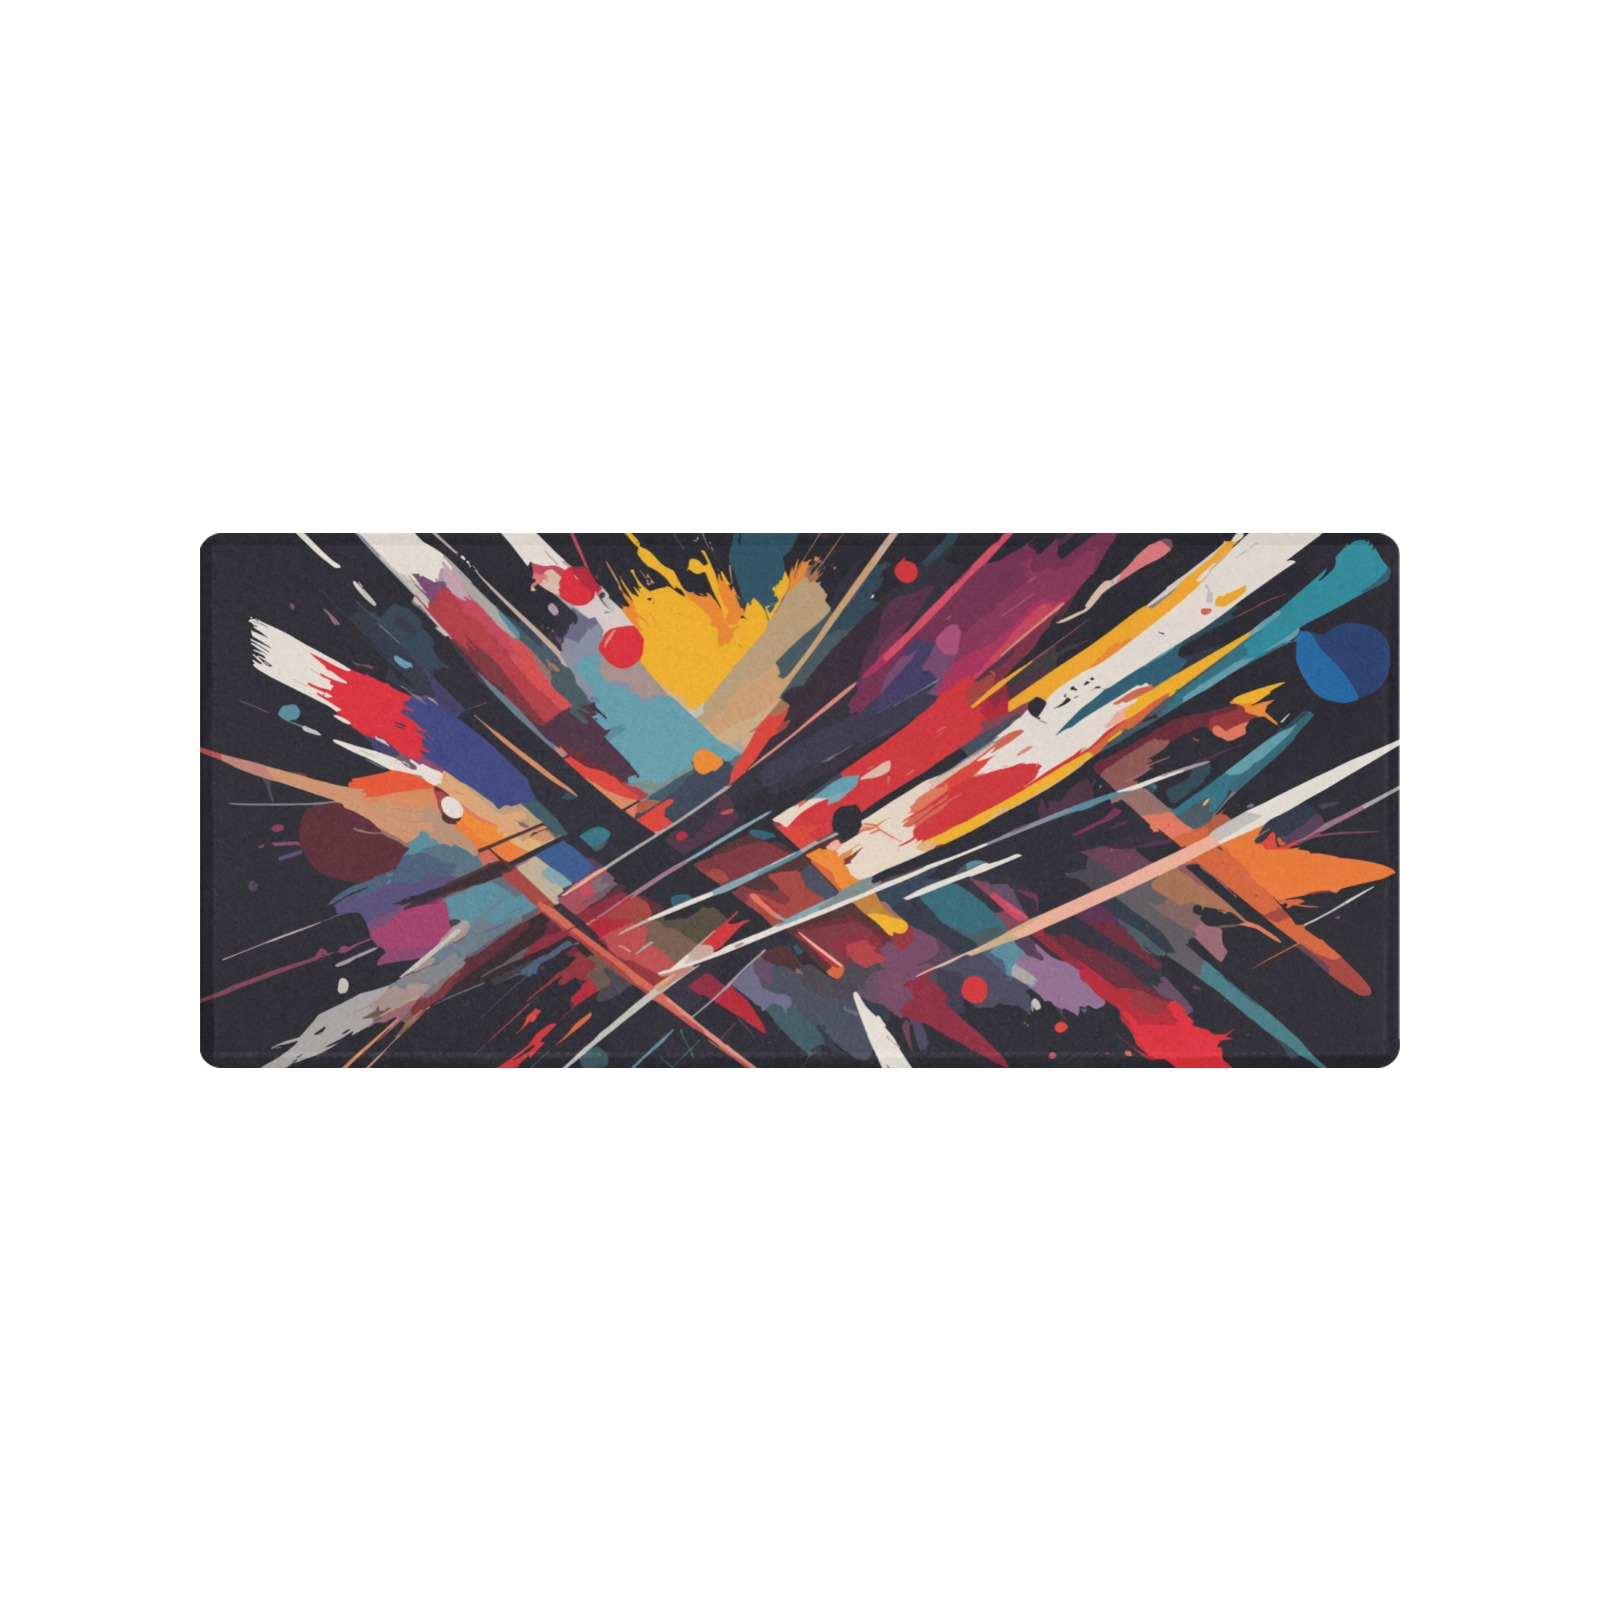 Stunning abstract art of colorful paint strokes Gaming Mousepad (35"x16")